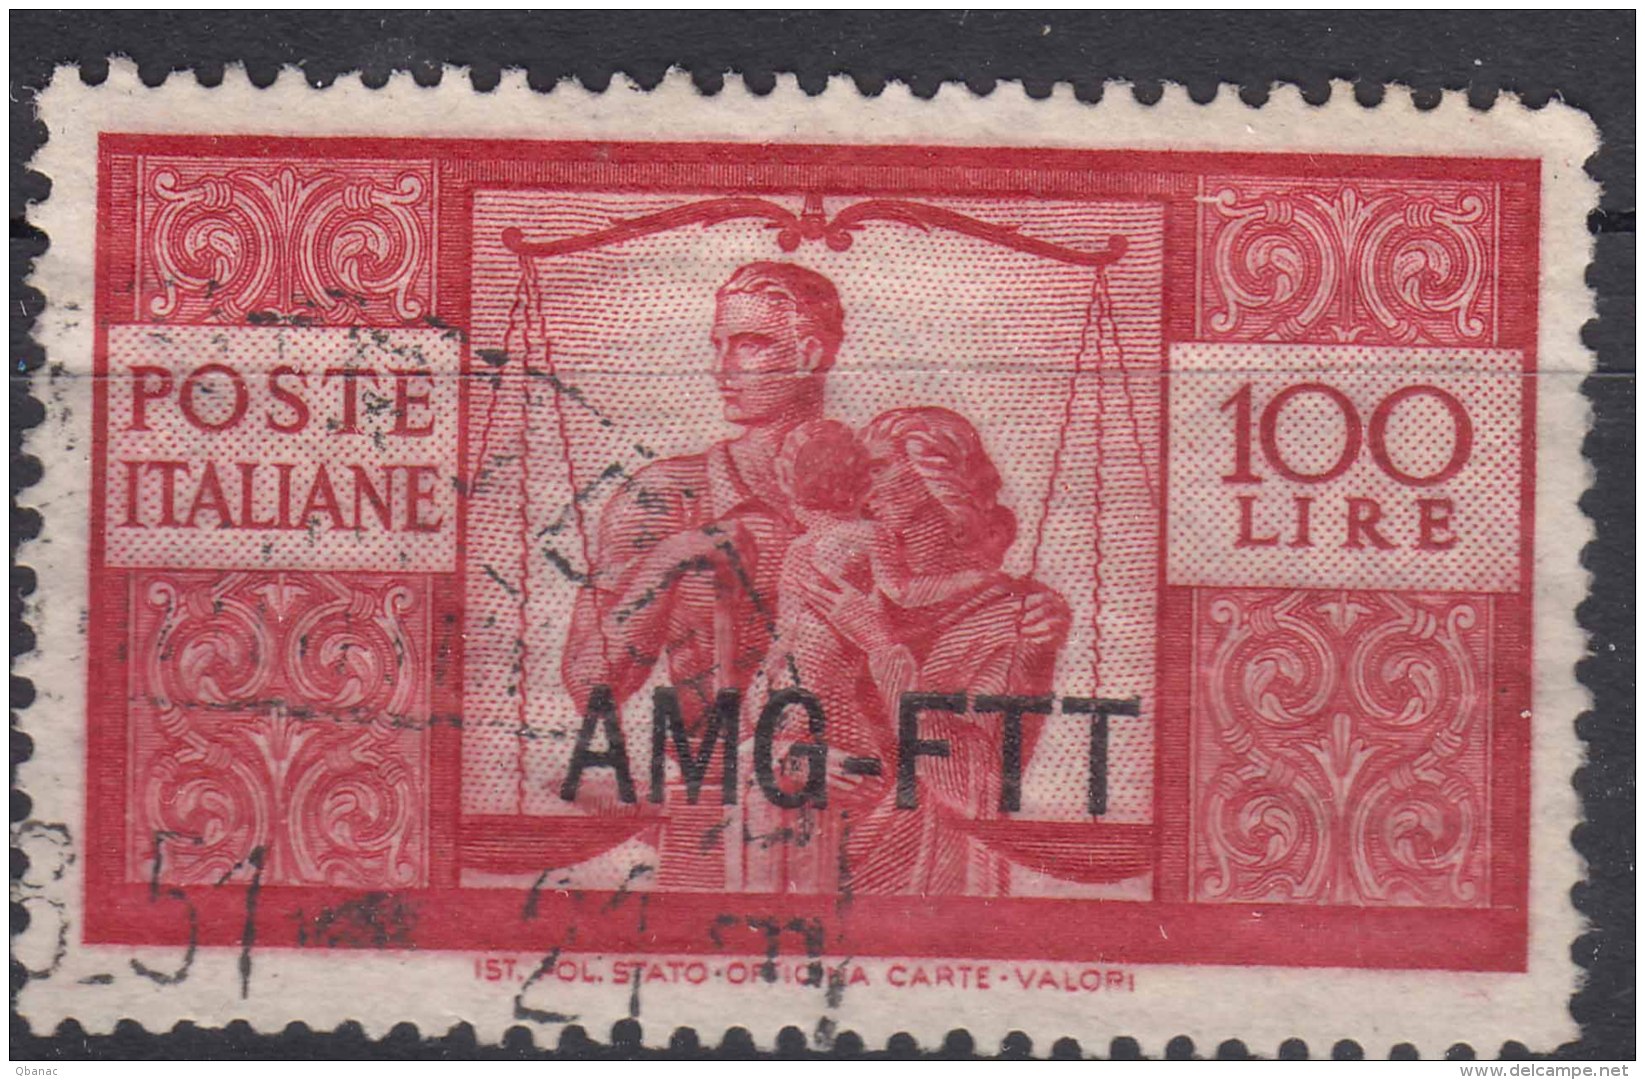 Italy Trieste Zone A AMG-FTT 1949 Sassone#67 Used - Afgestempeld